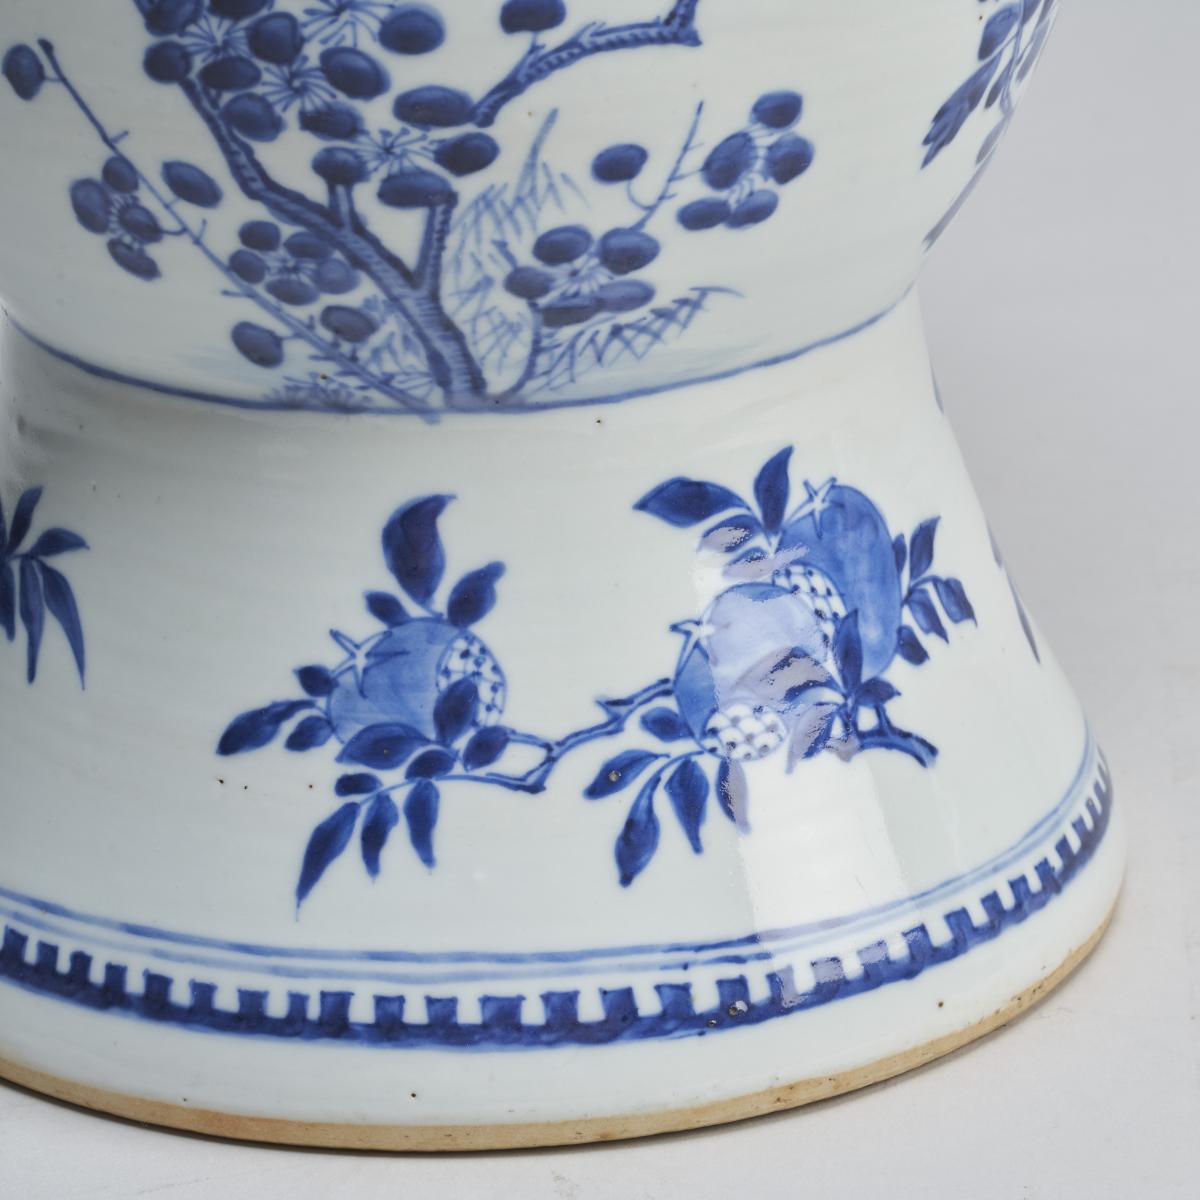 An attractive pair of large, Chinese 19th Century blue and white vases